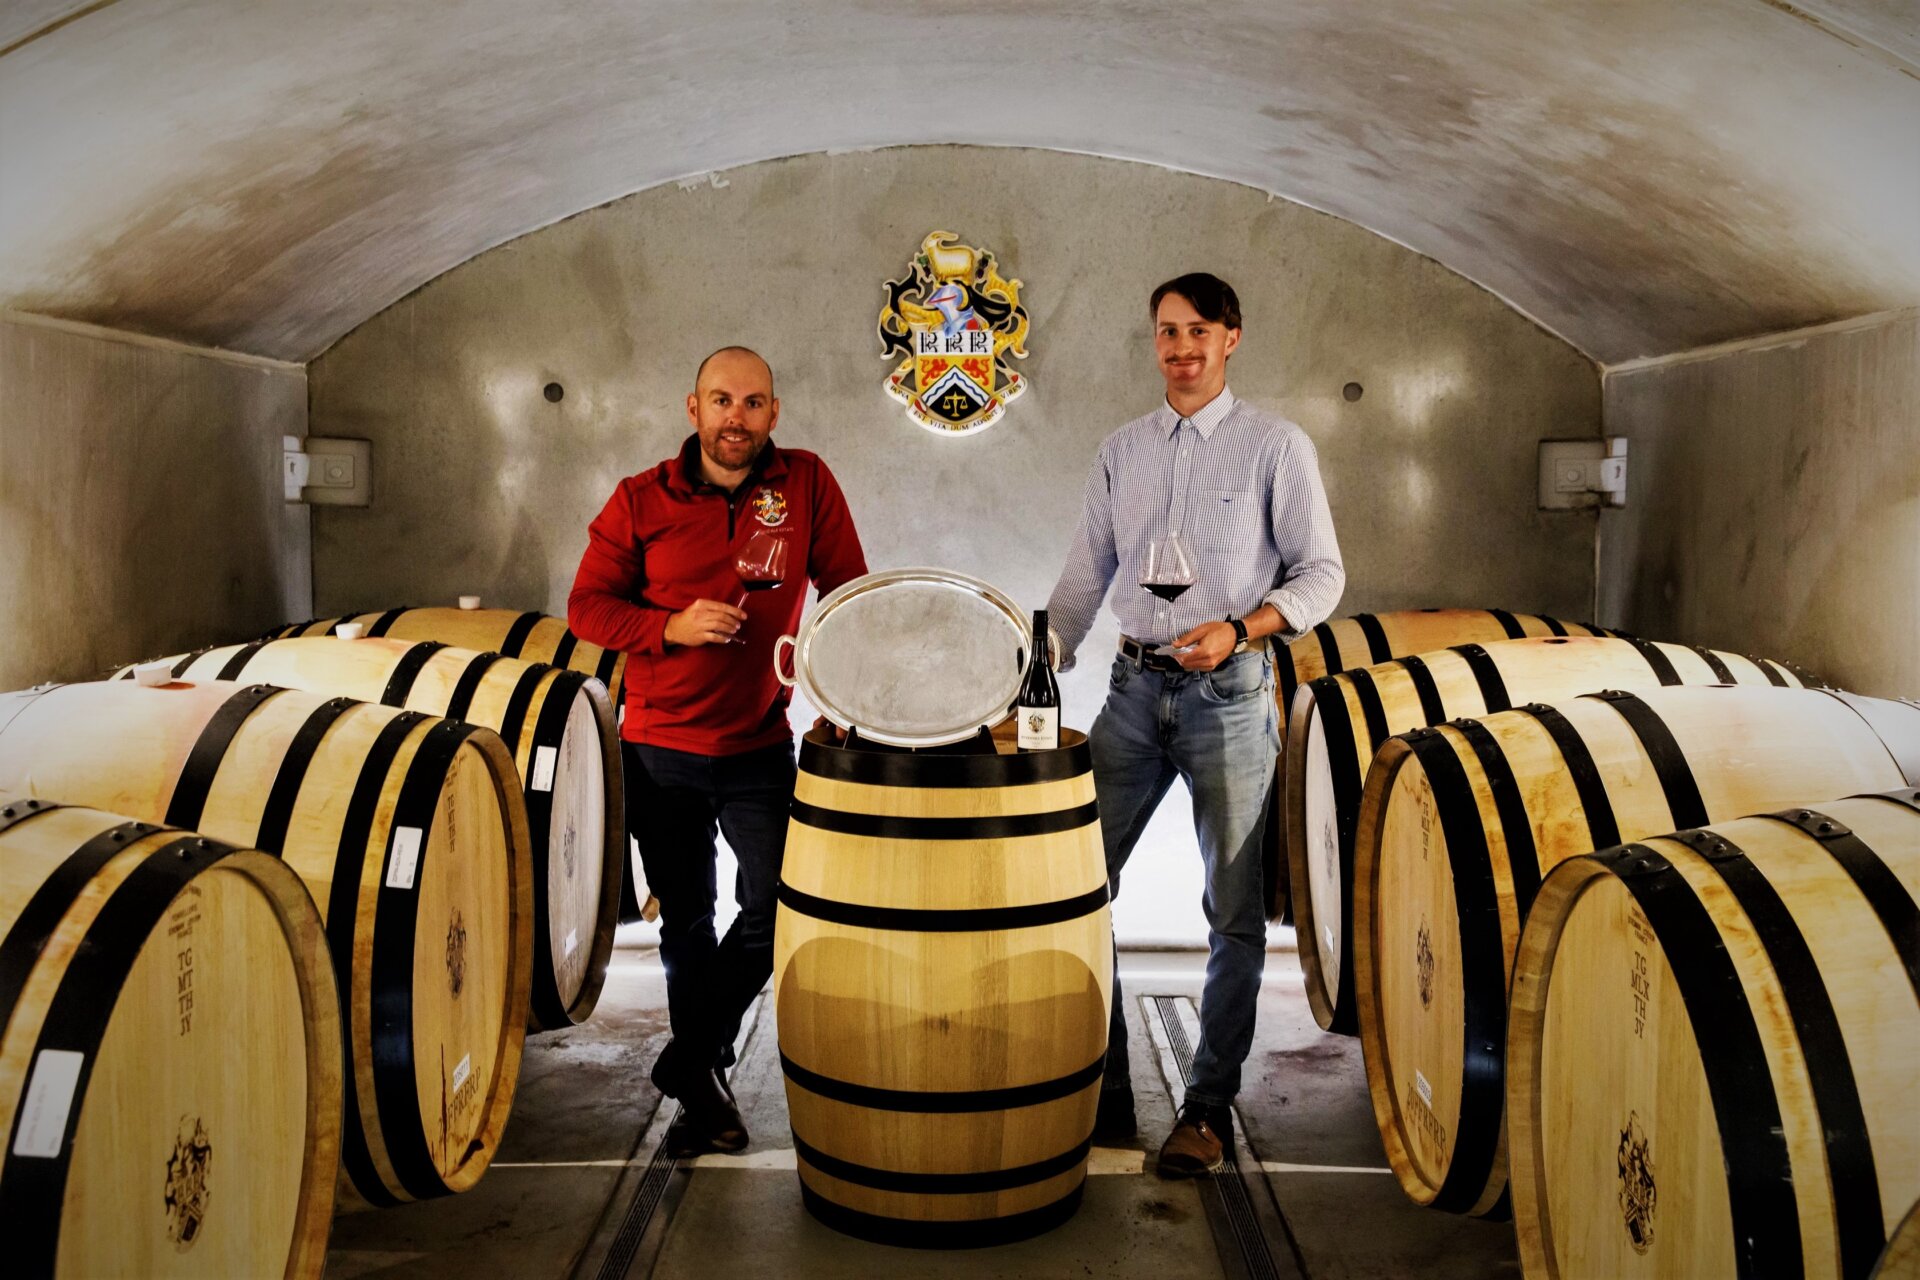 Two men stand either side of a wine barrel in a room with other wine barrels. There is a trophy plate displayed on the top of the wine barrel. Each man holds a glass of dark red wine.